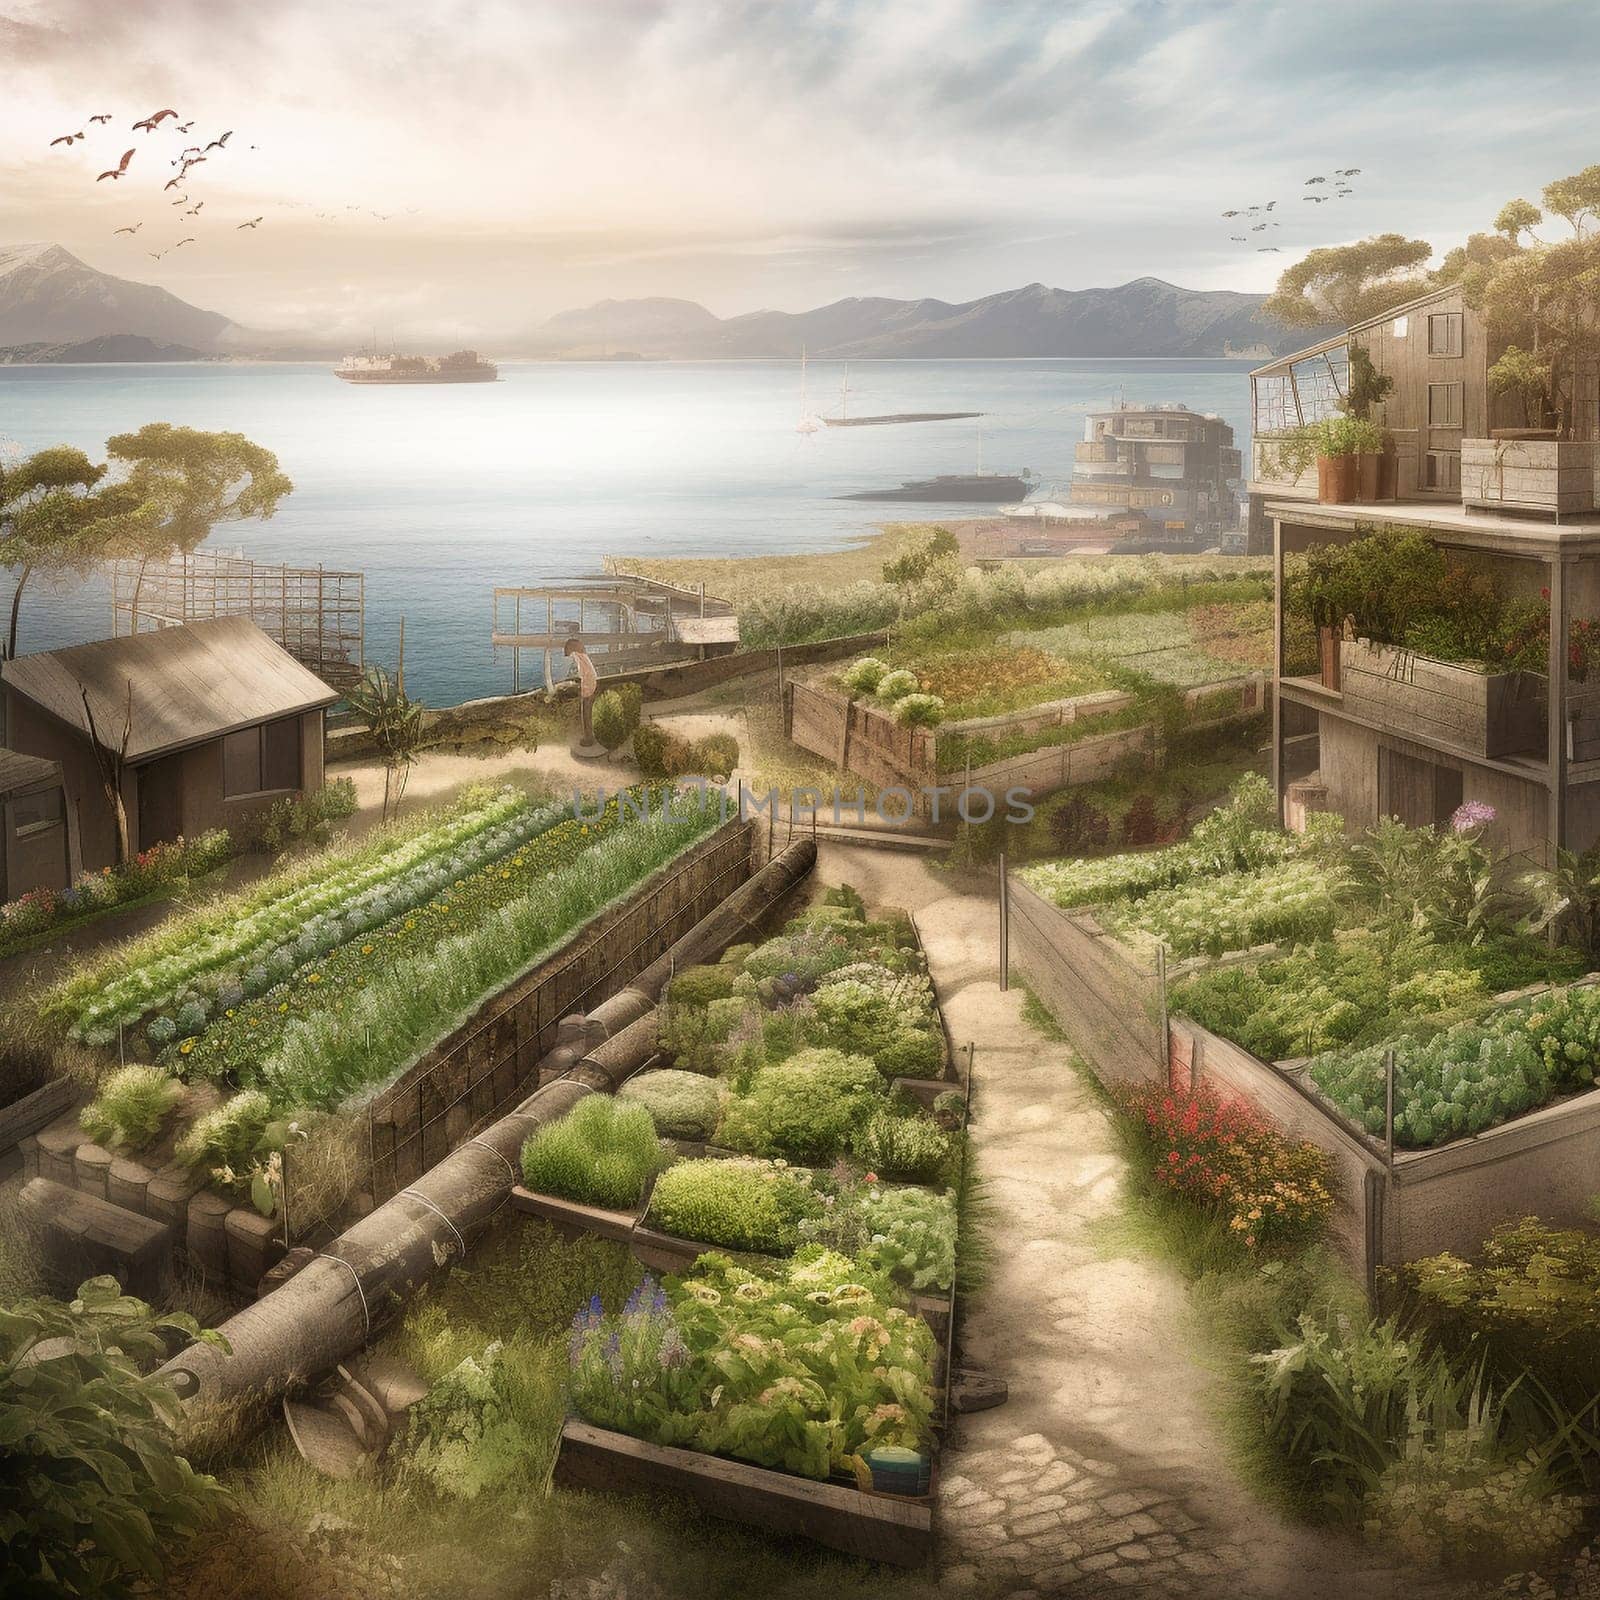 This image captures the potential for urban farming to bring people closer to nature and the environment. It shows an urban farm located on the coast, with stunning views of the ocean stretching out in every direction. The image conveys a sense of serenity and tranquility, highlighting the restorative power of nature and the importance of sustainability in urban living.